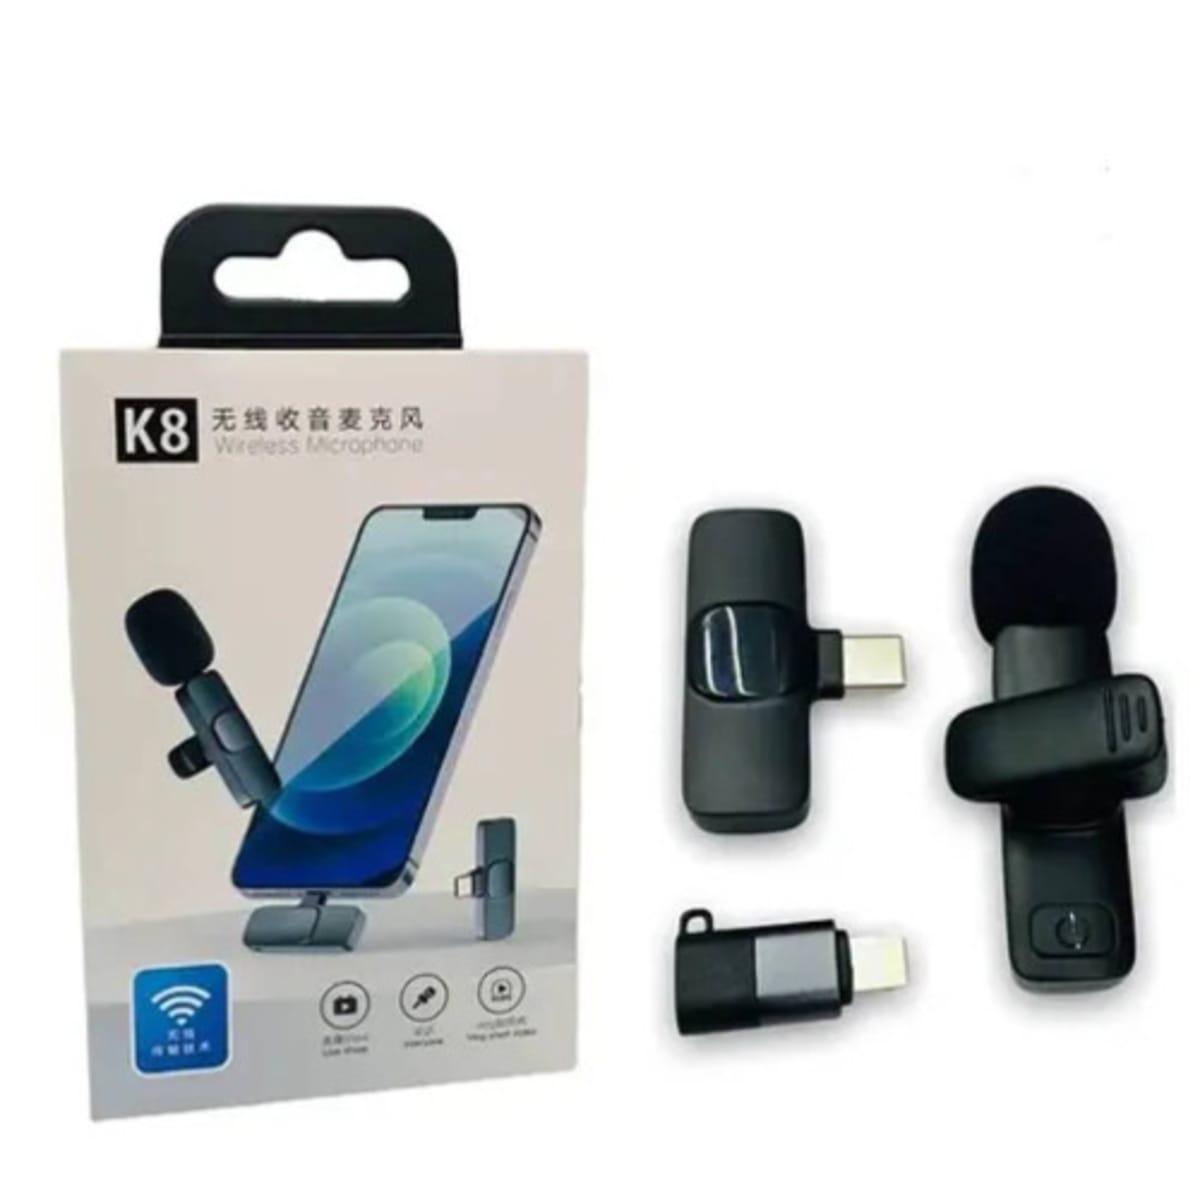 K8 Wireless Microphone Audio Video Recording Mini Mic For iPhone Android  Type-c